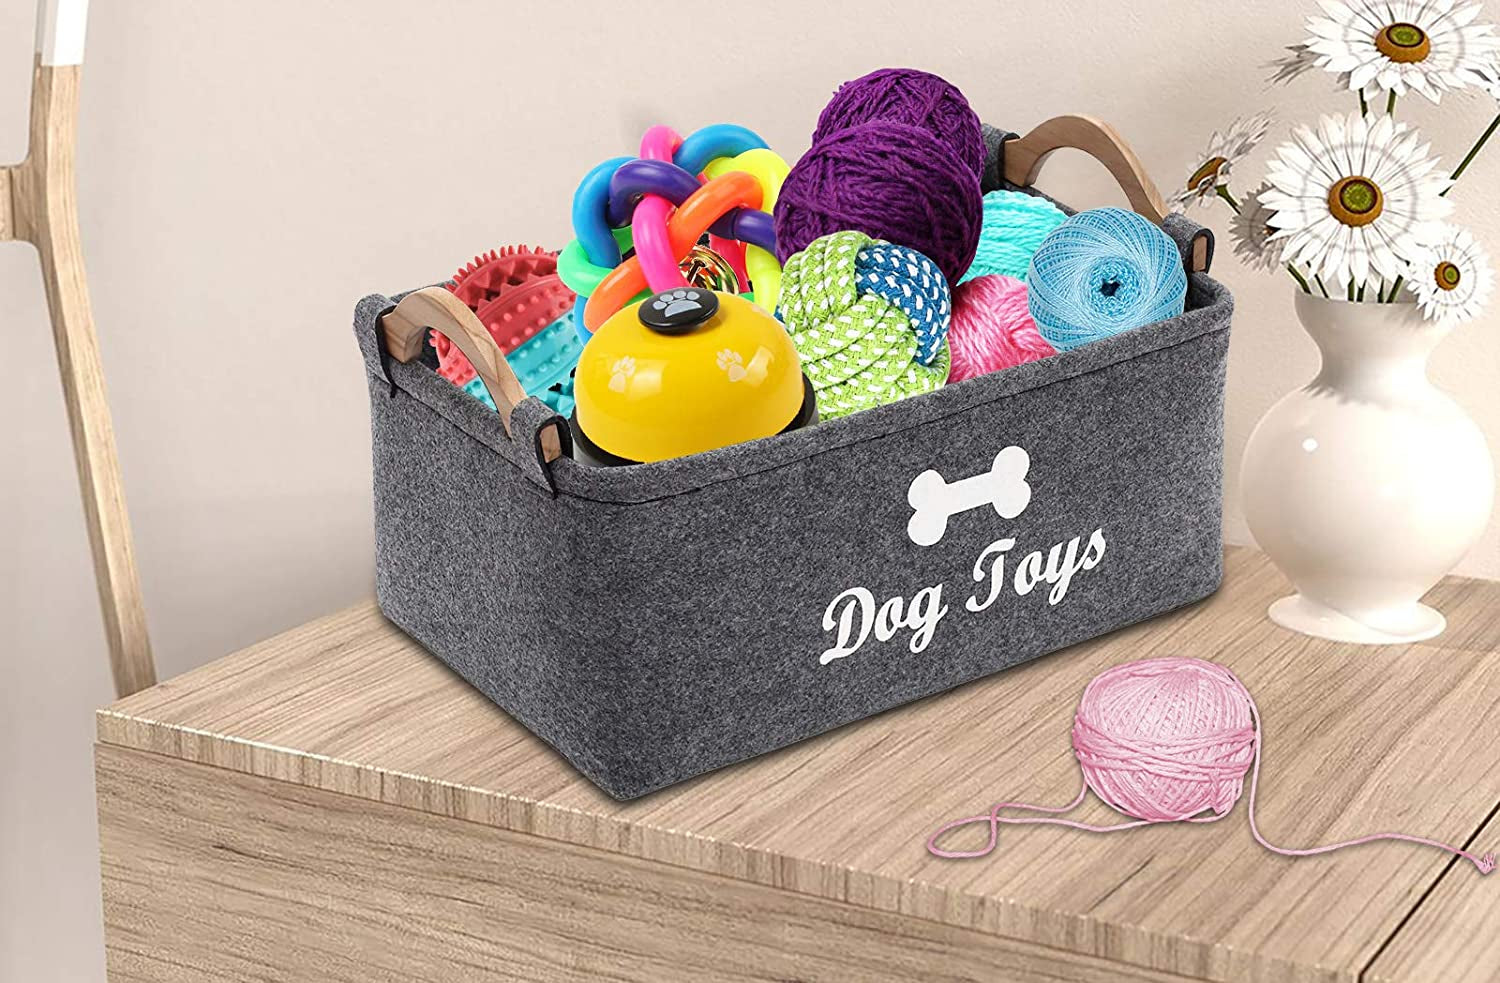 Felt Pet Toy Box and Dog Toy Box Storage Basket Chest Organizer - Perfect for Organizing Pet Toys, Blankets, Leashes and Food - Dog Toy - Grey